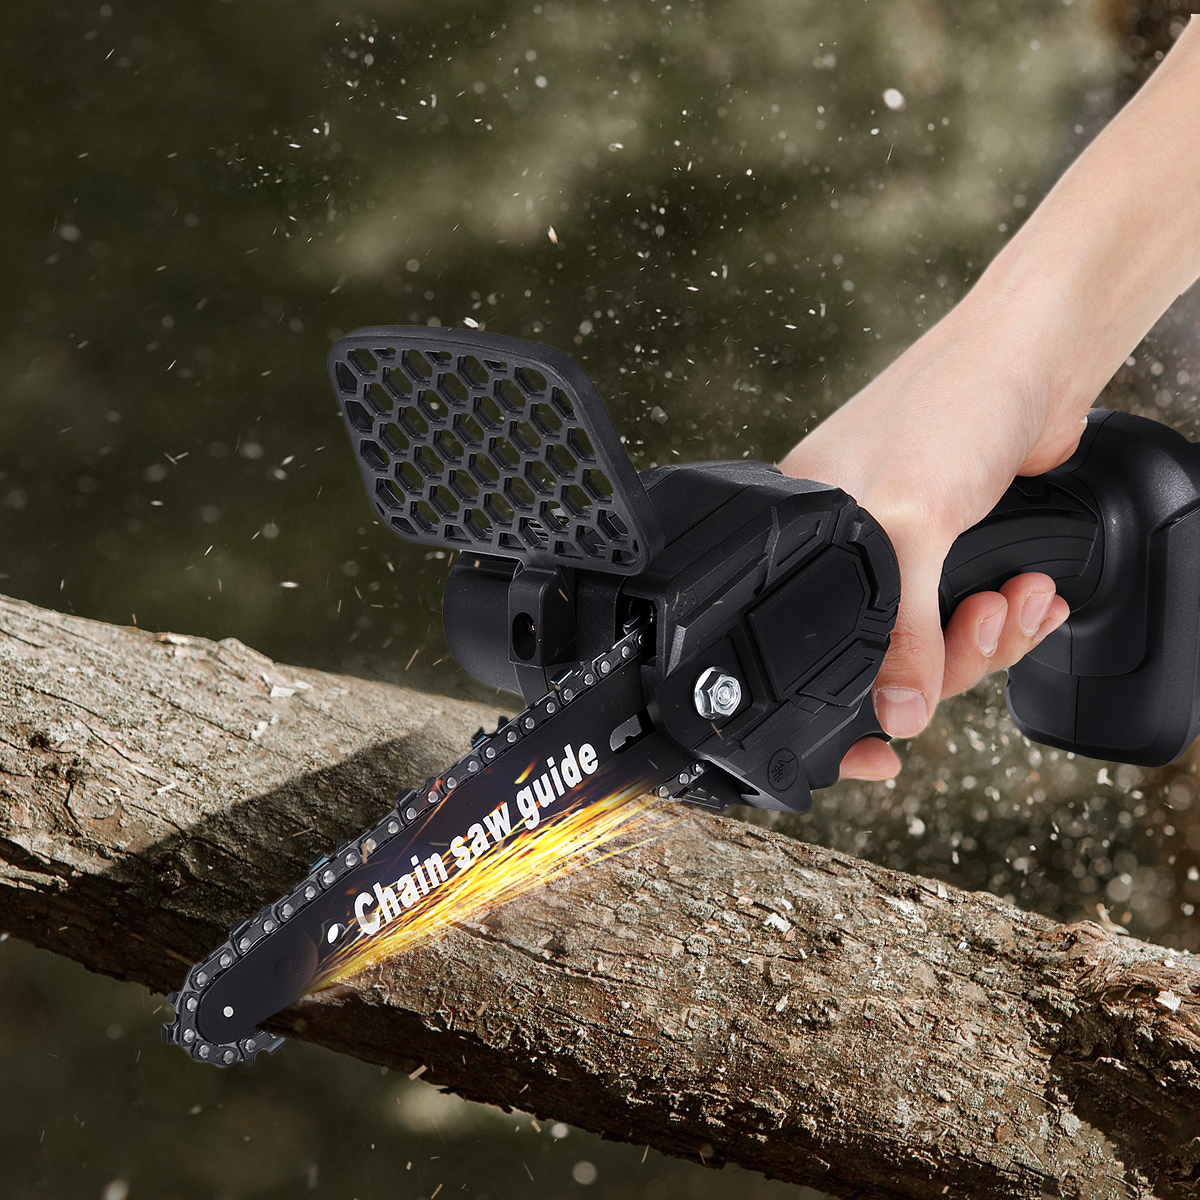 Doersupp-550W-Cordless-Electric-Chain-Saw-Wood-Mini-Cutter-Chainsaw-6-Inch-One-Hand-Saws-Woodworking-1789708-13